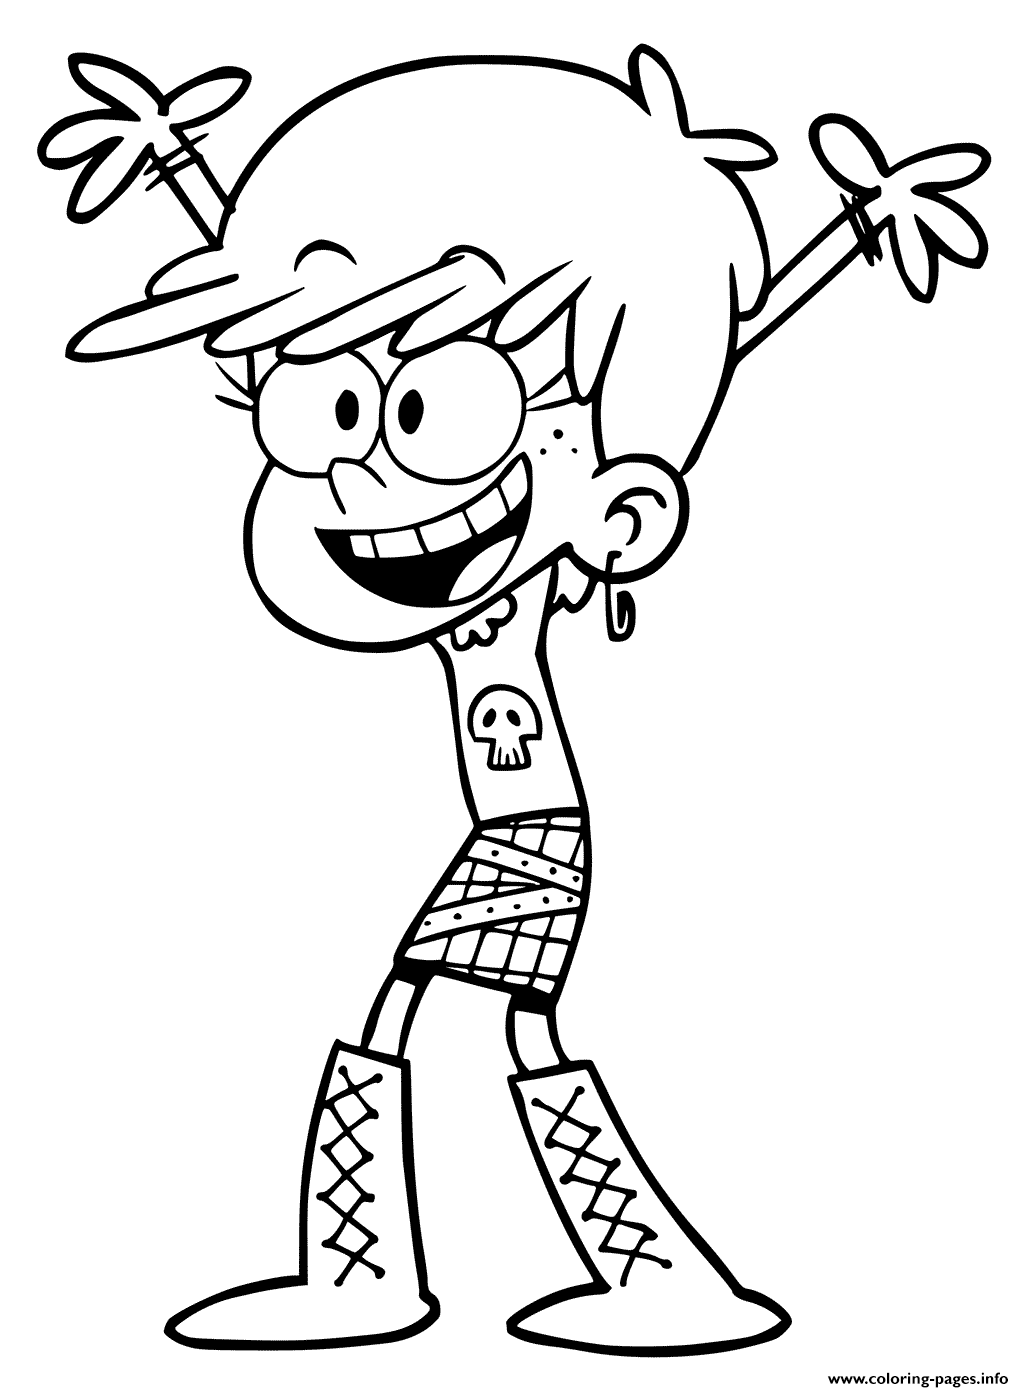 Download or print this amazing coloring page: Luna Loud Coloring Pages Prin...